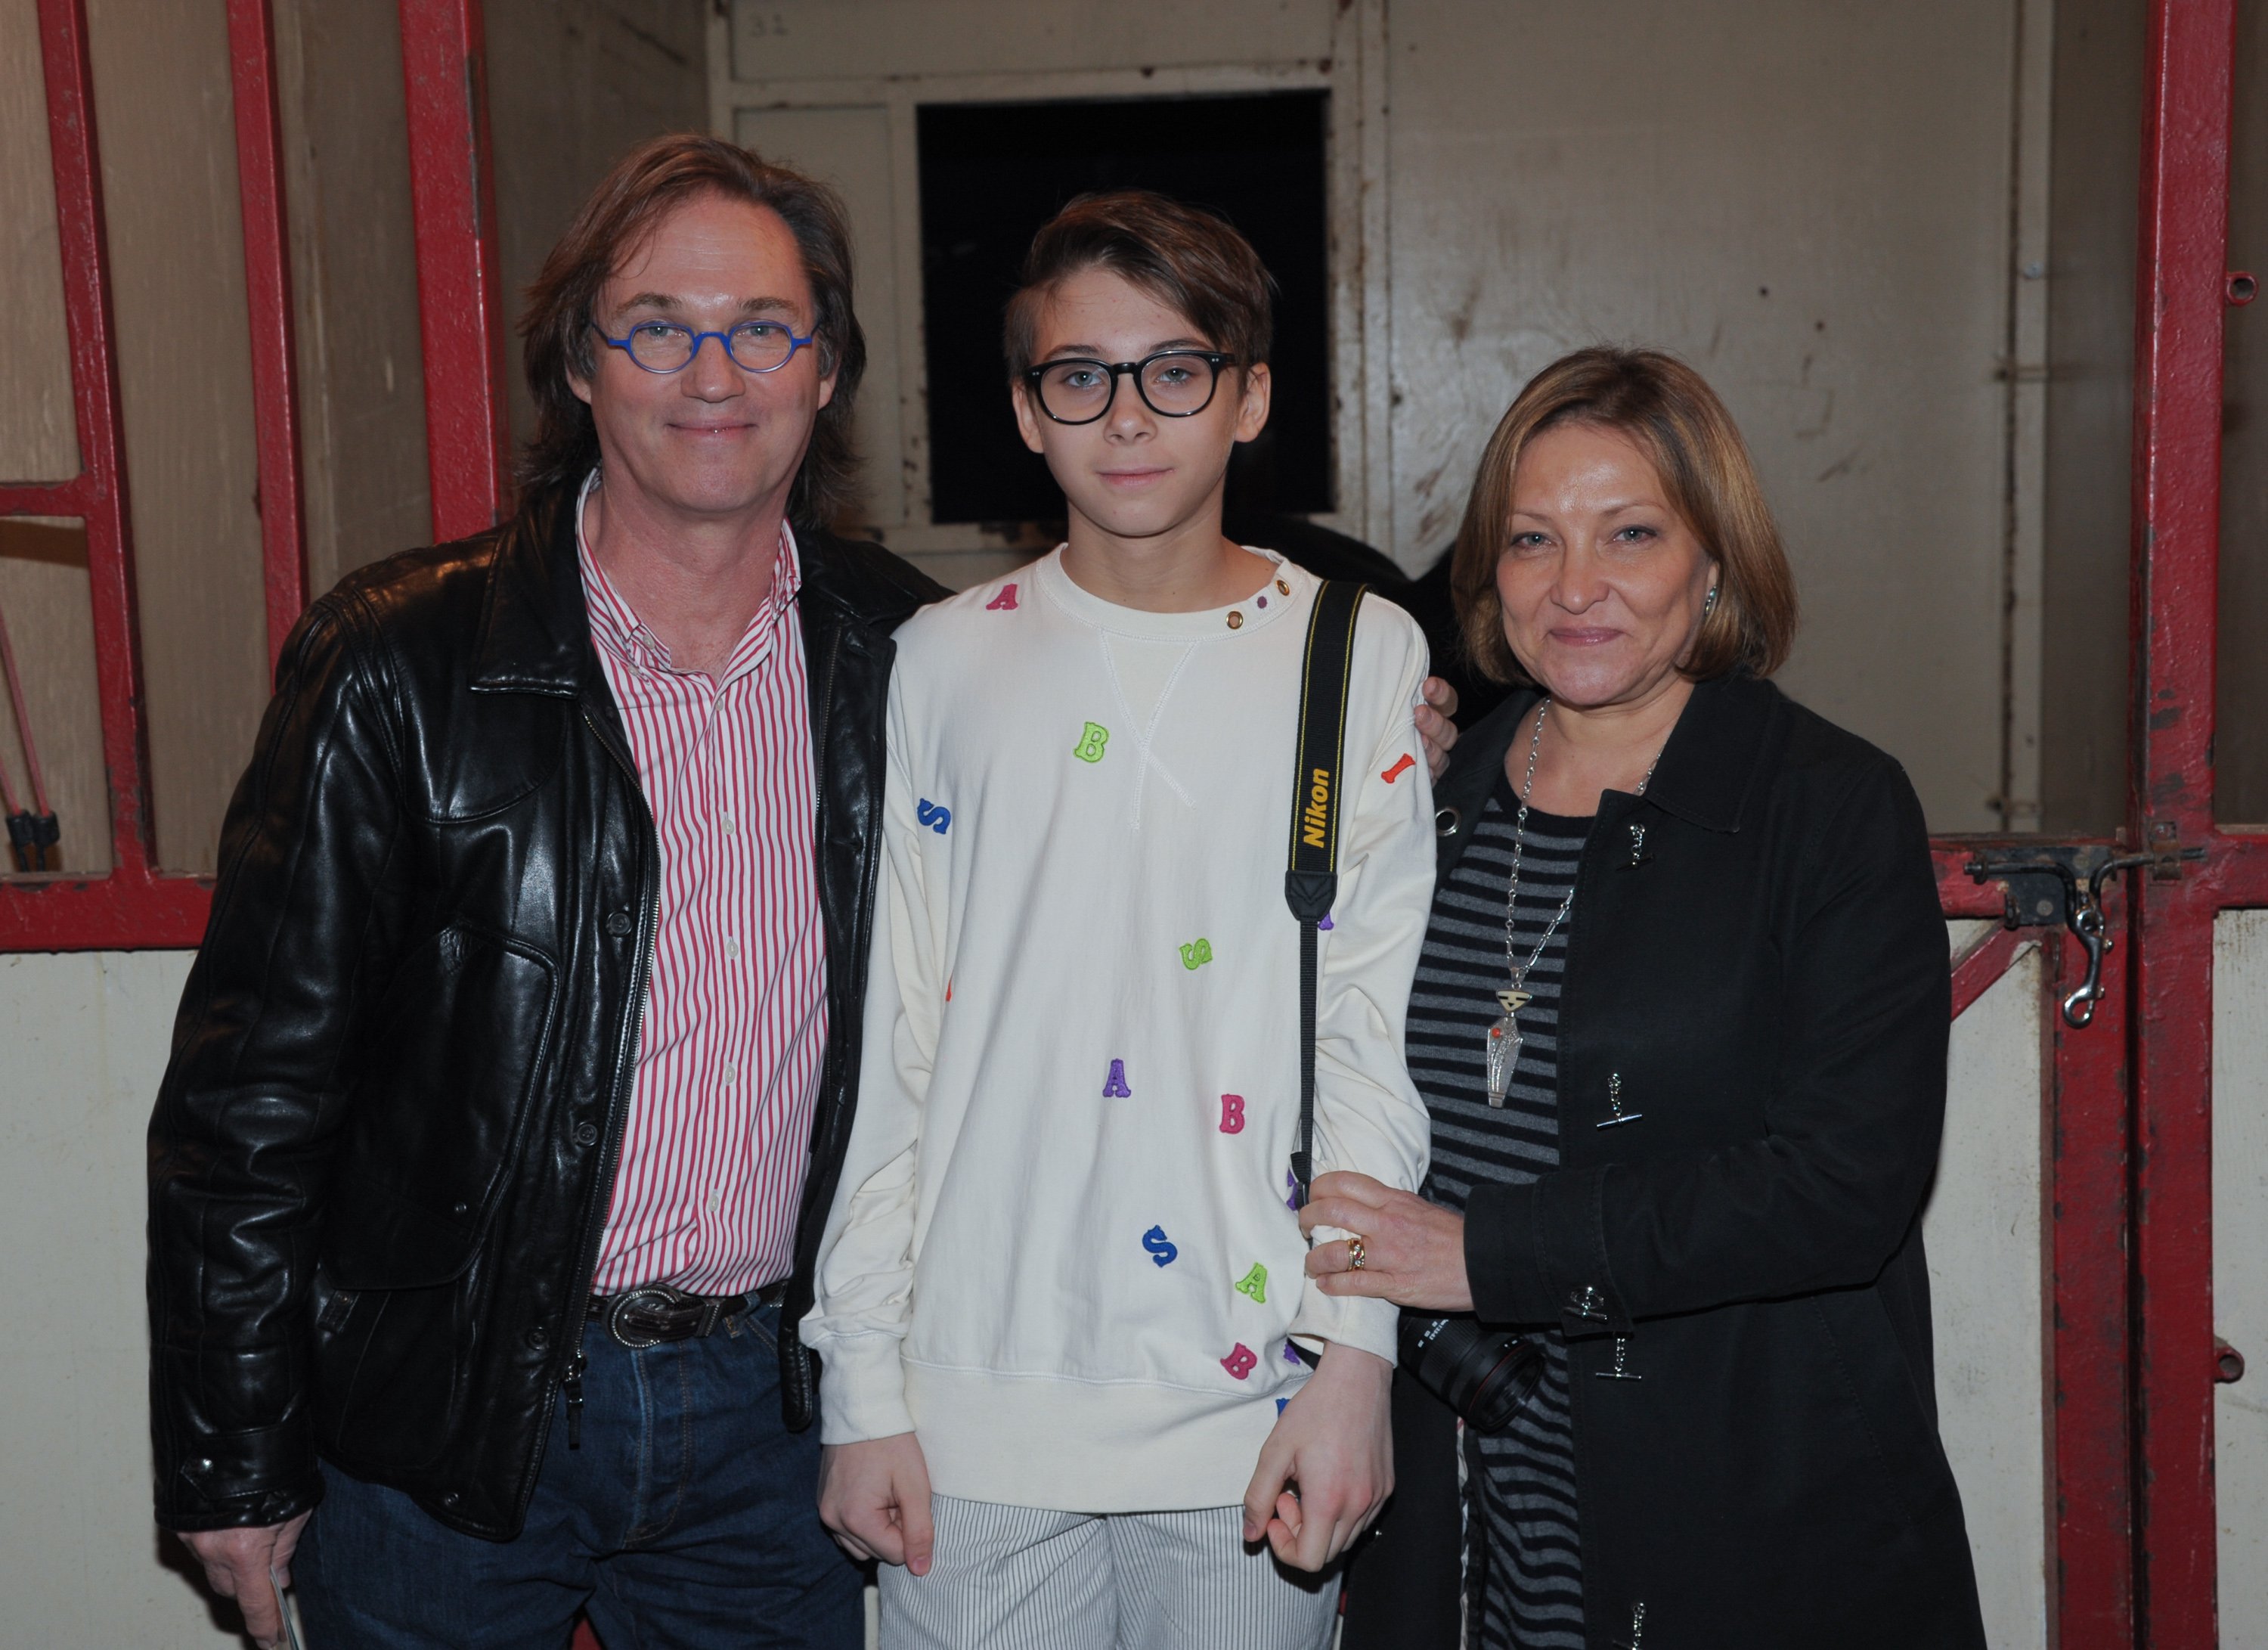 Richard Thomas, his son Montana James Thomas, and his wife Georgiana Bischoff Thomas at 34th season Big Apple Circus Under the Big Top event on October 23, 2011, in New York City | Source: Getty Images